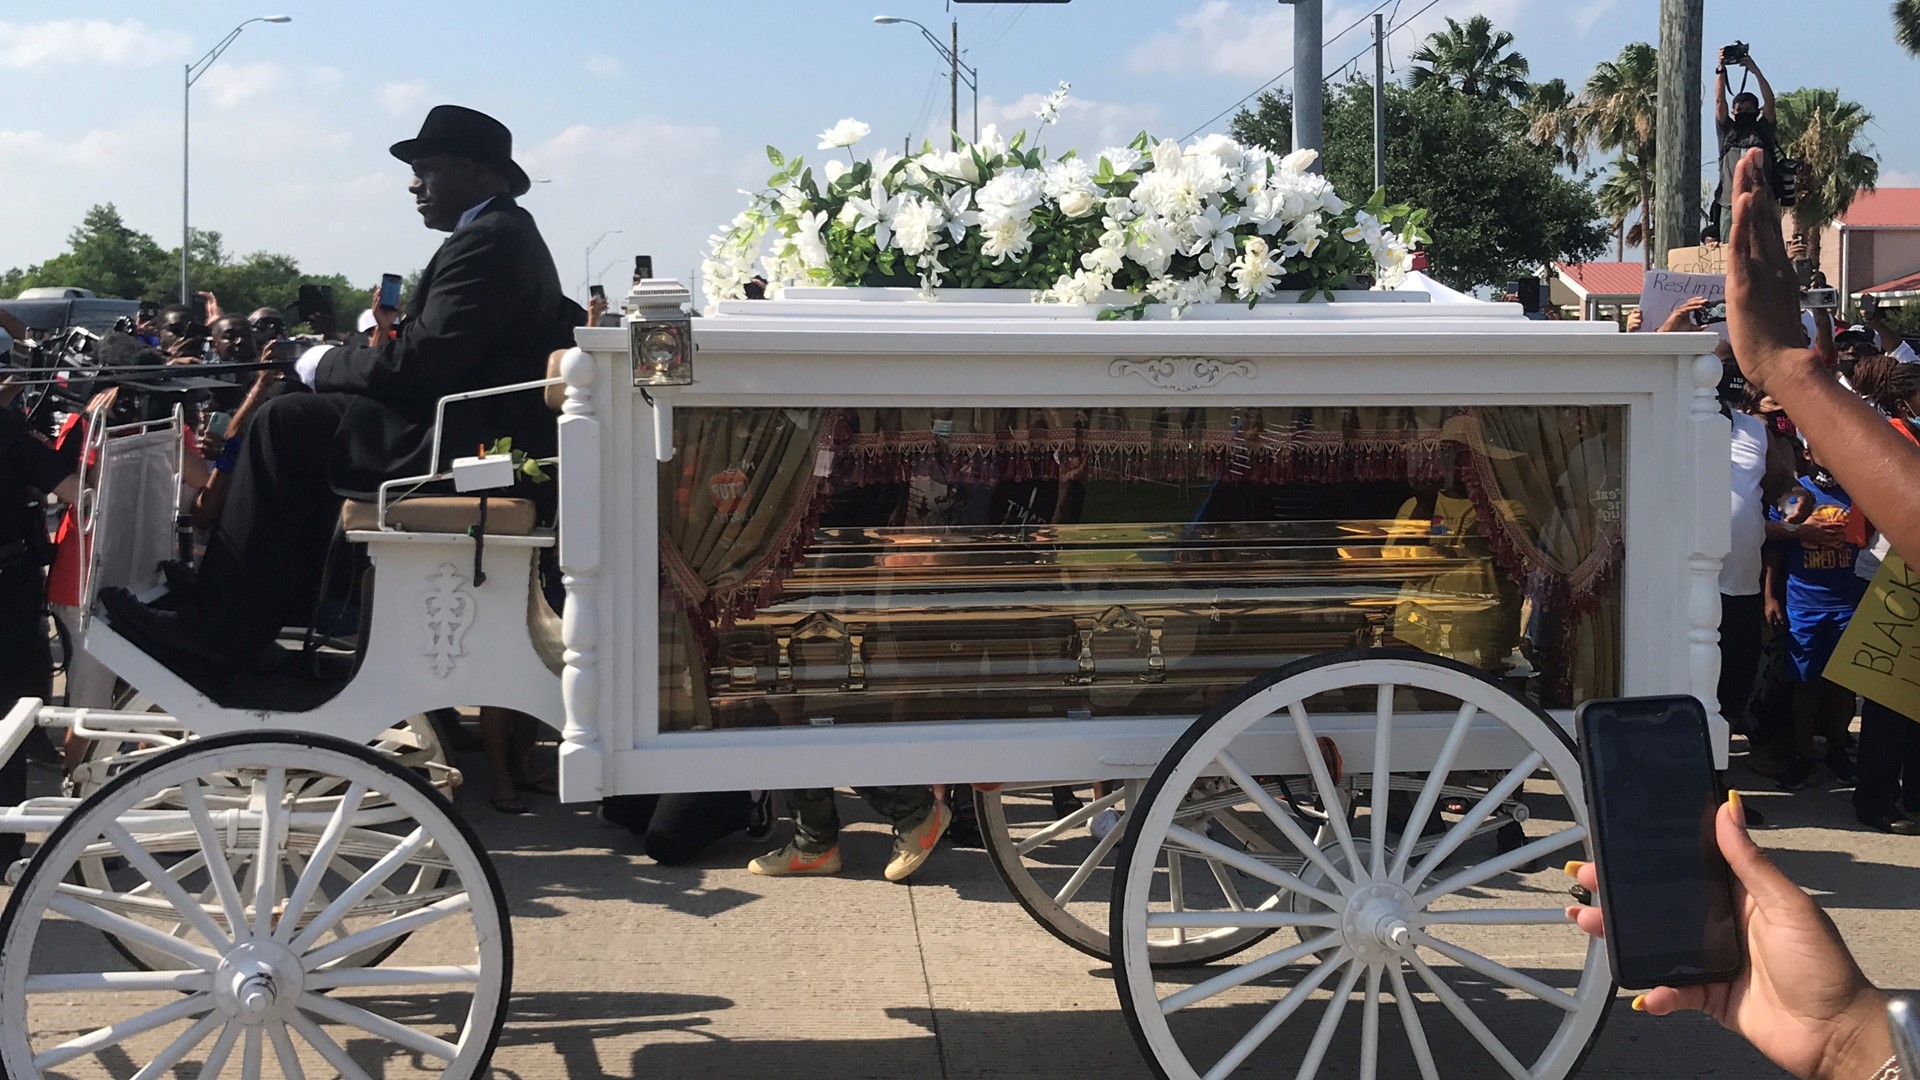 In Houston on Tuesday, some said George Floyd’s final words gave voice to the “unknowns” – men and women killed by police whose stories haven’t made worldwide news.